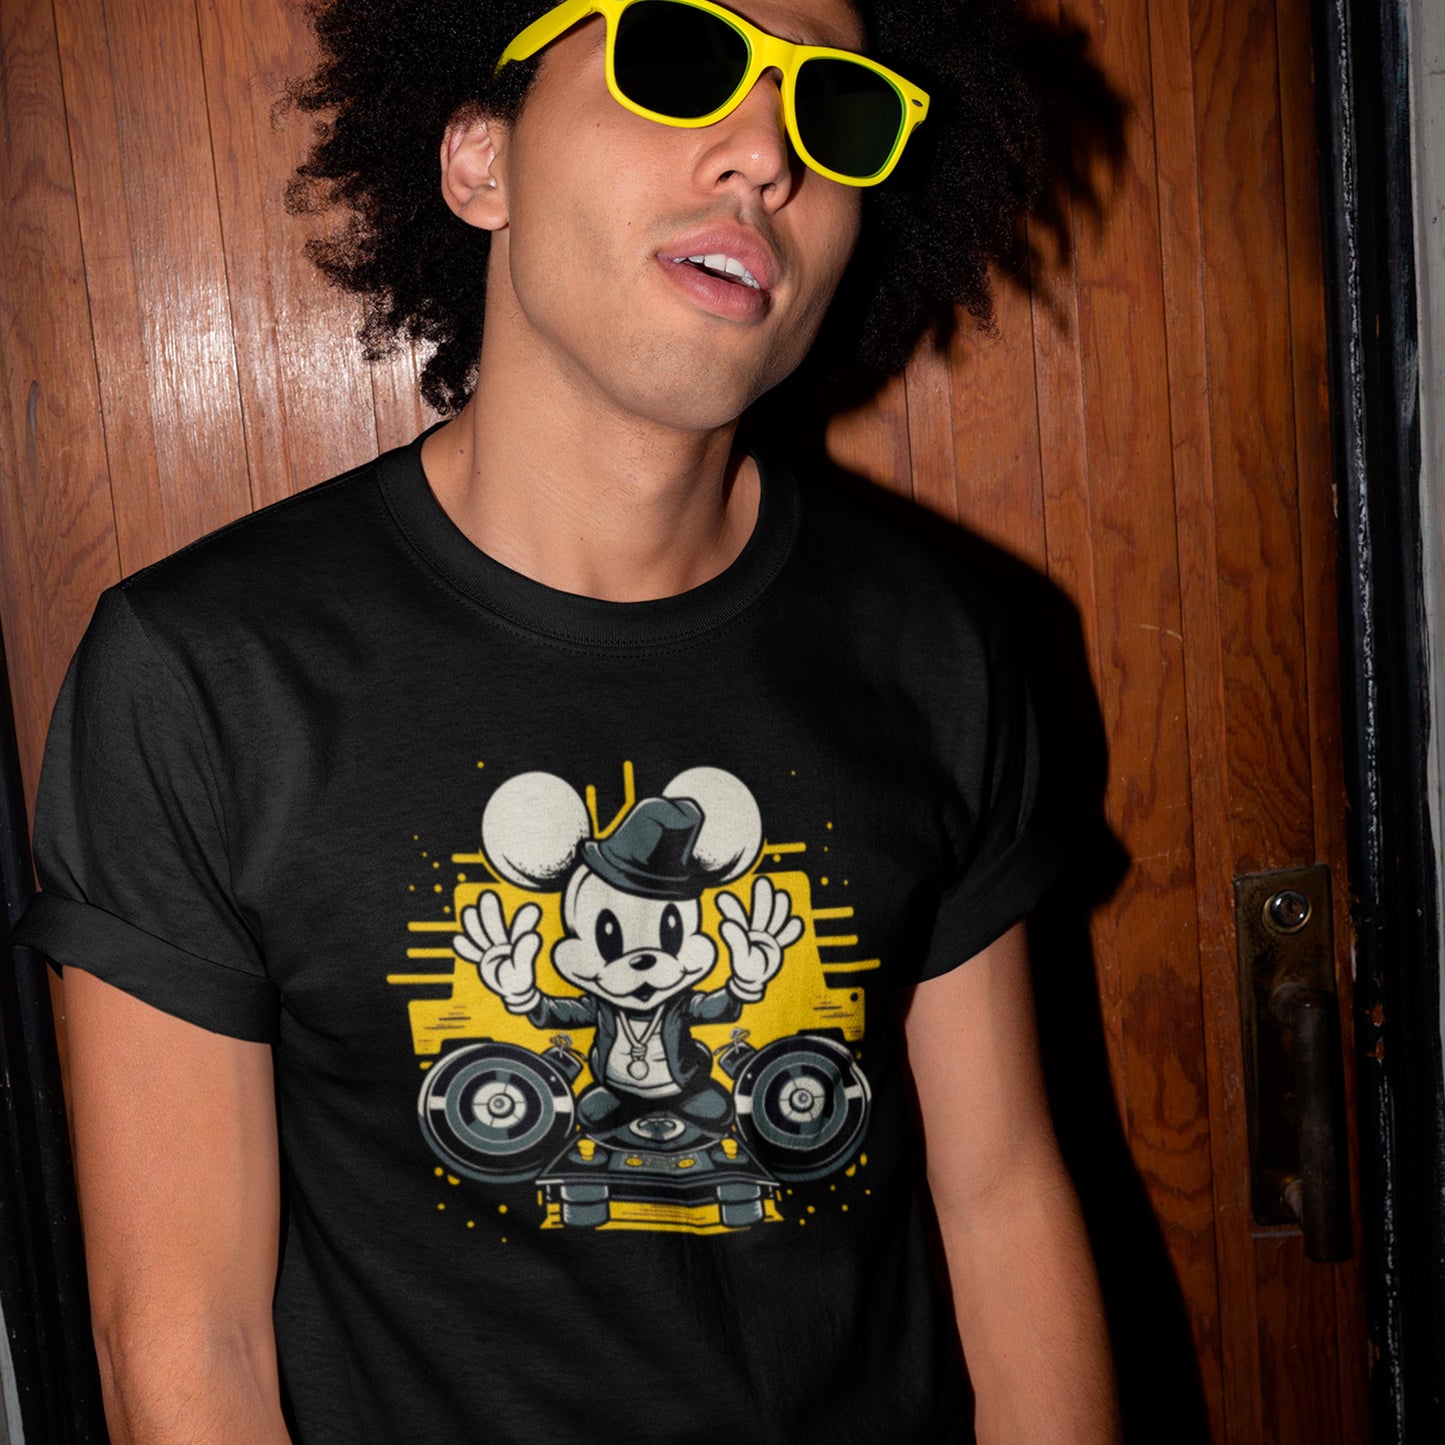 Cheese and Beats Unisex organic cotton t-shirt- worn by model